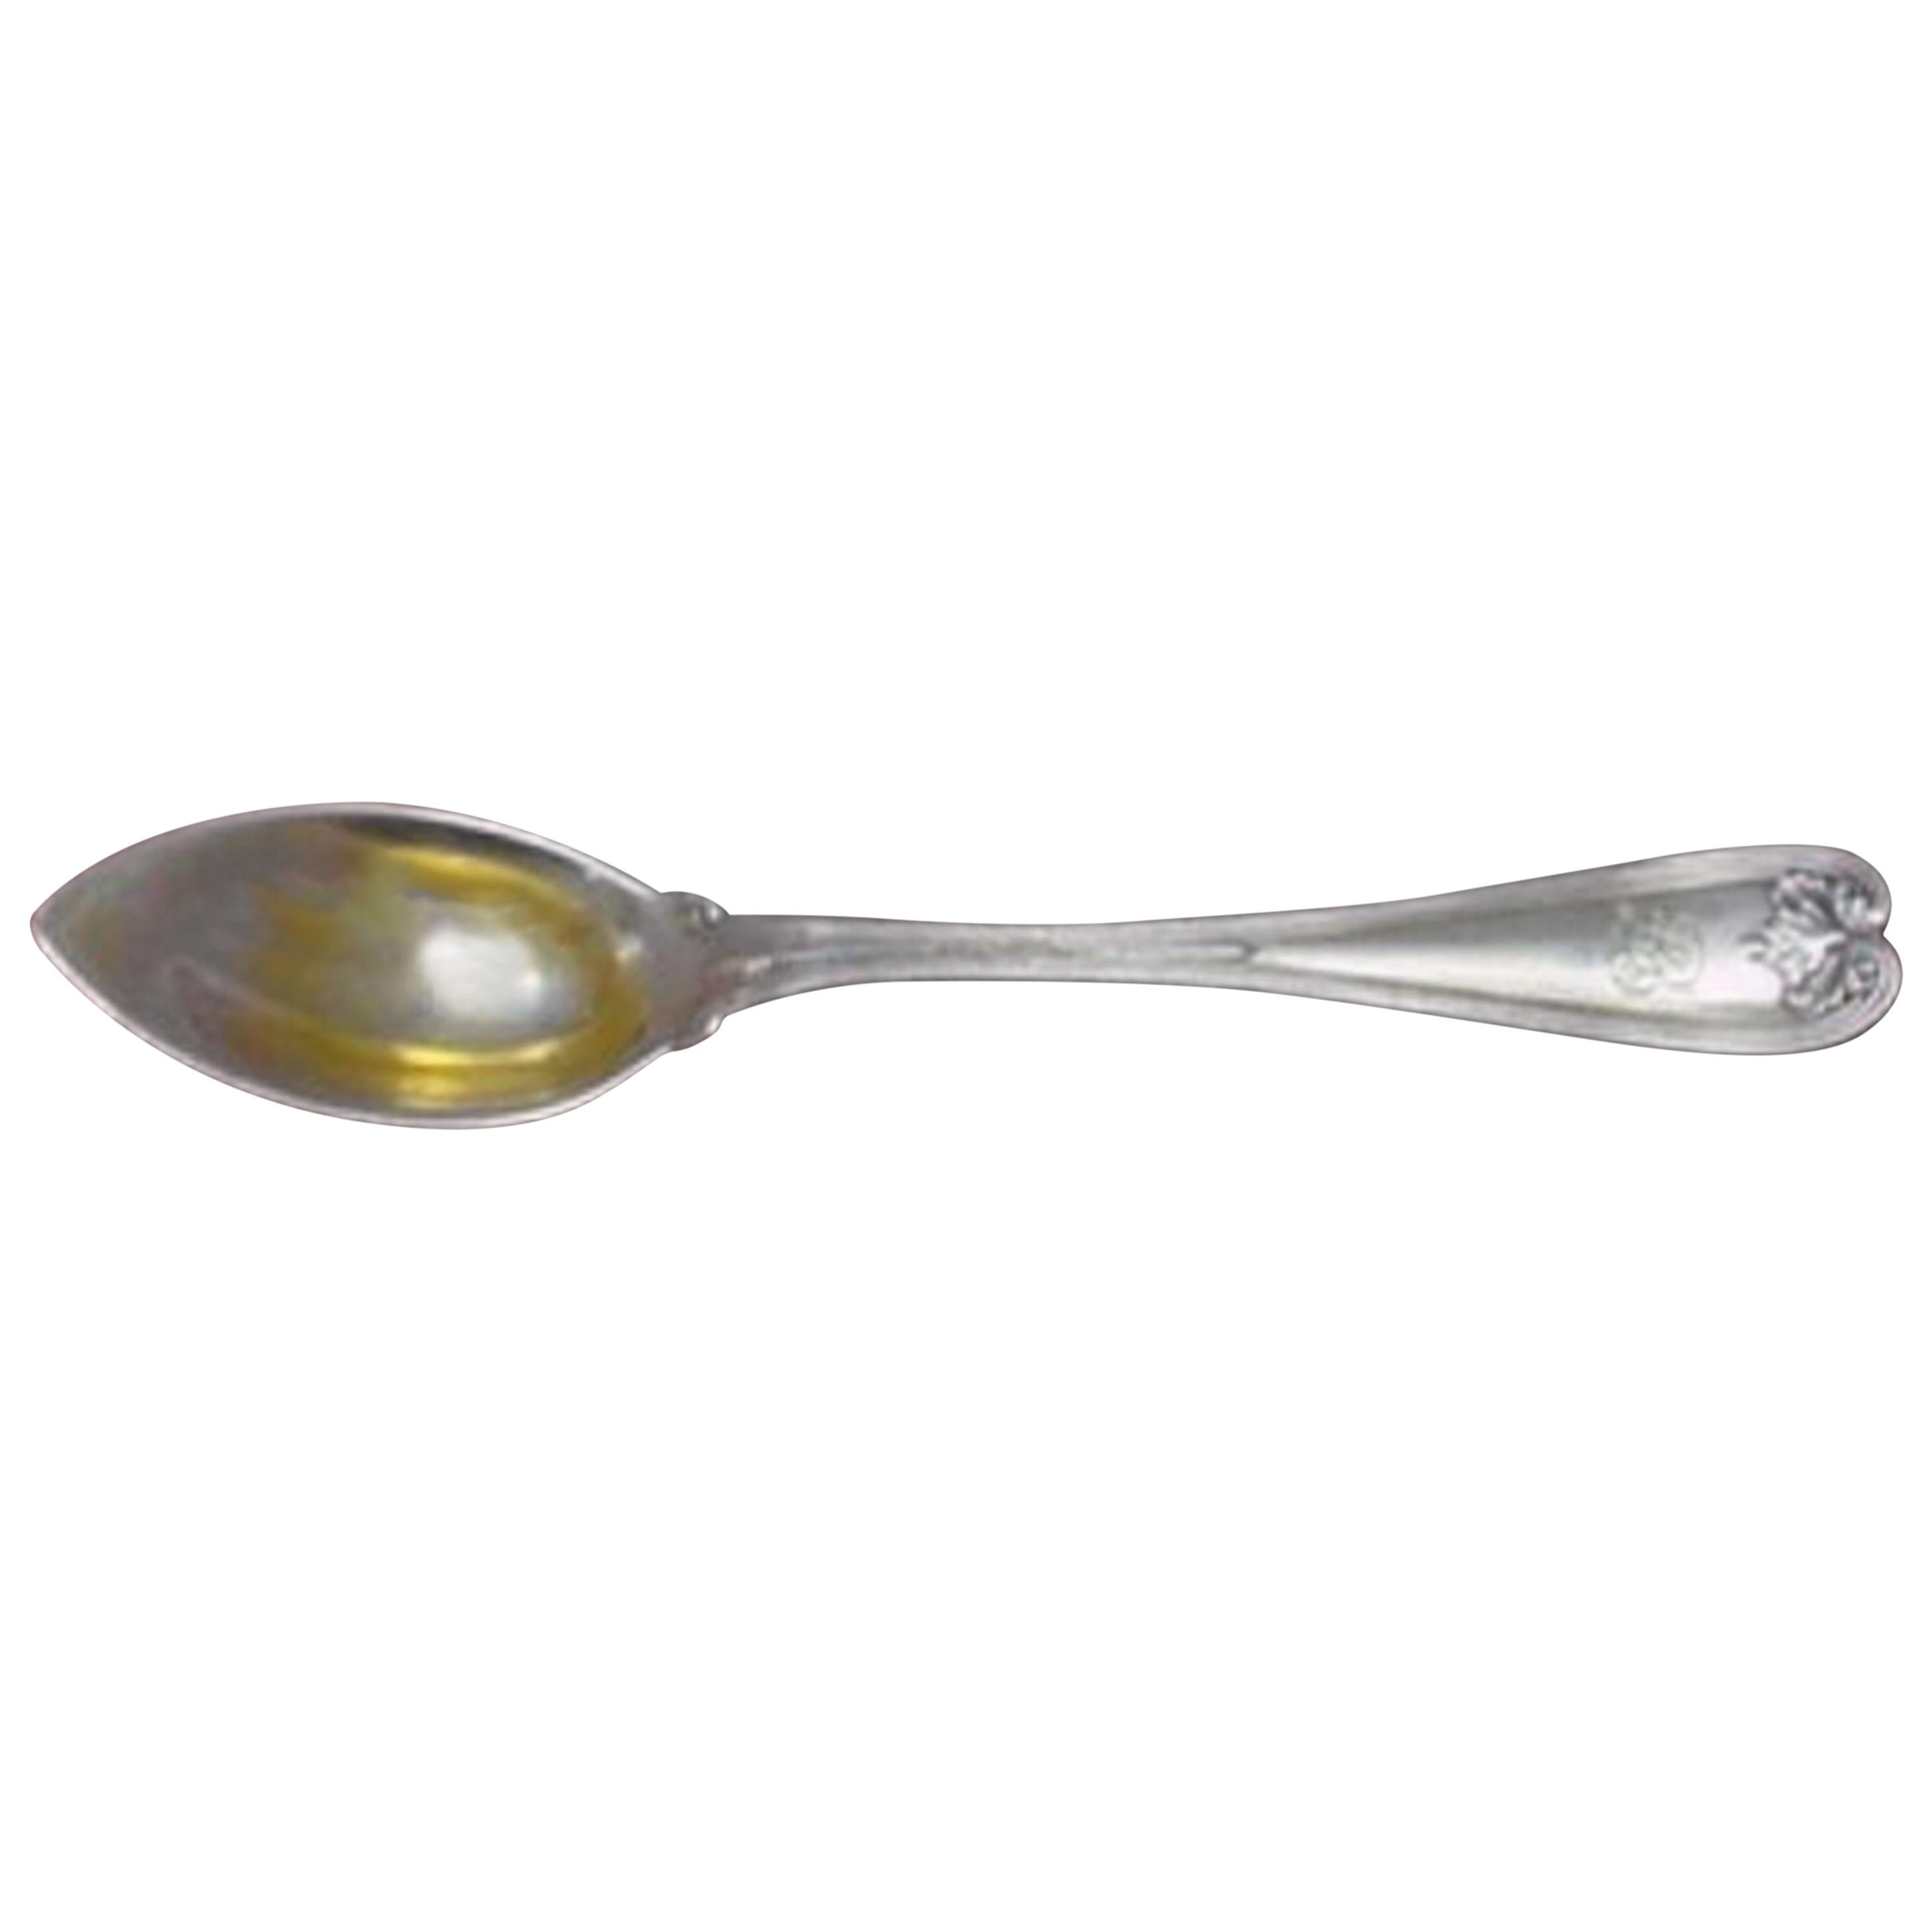 Ivy by Gorham Sterling Silver Egg Spoon Goldwashed 5" 